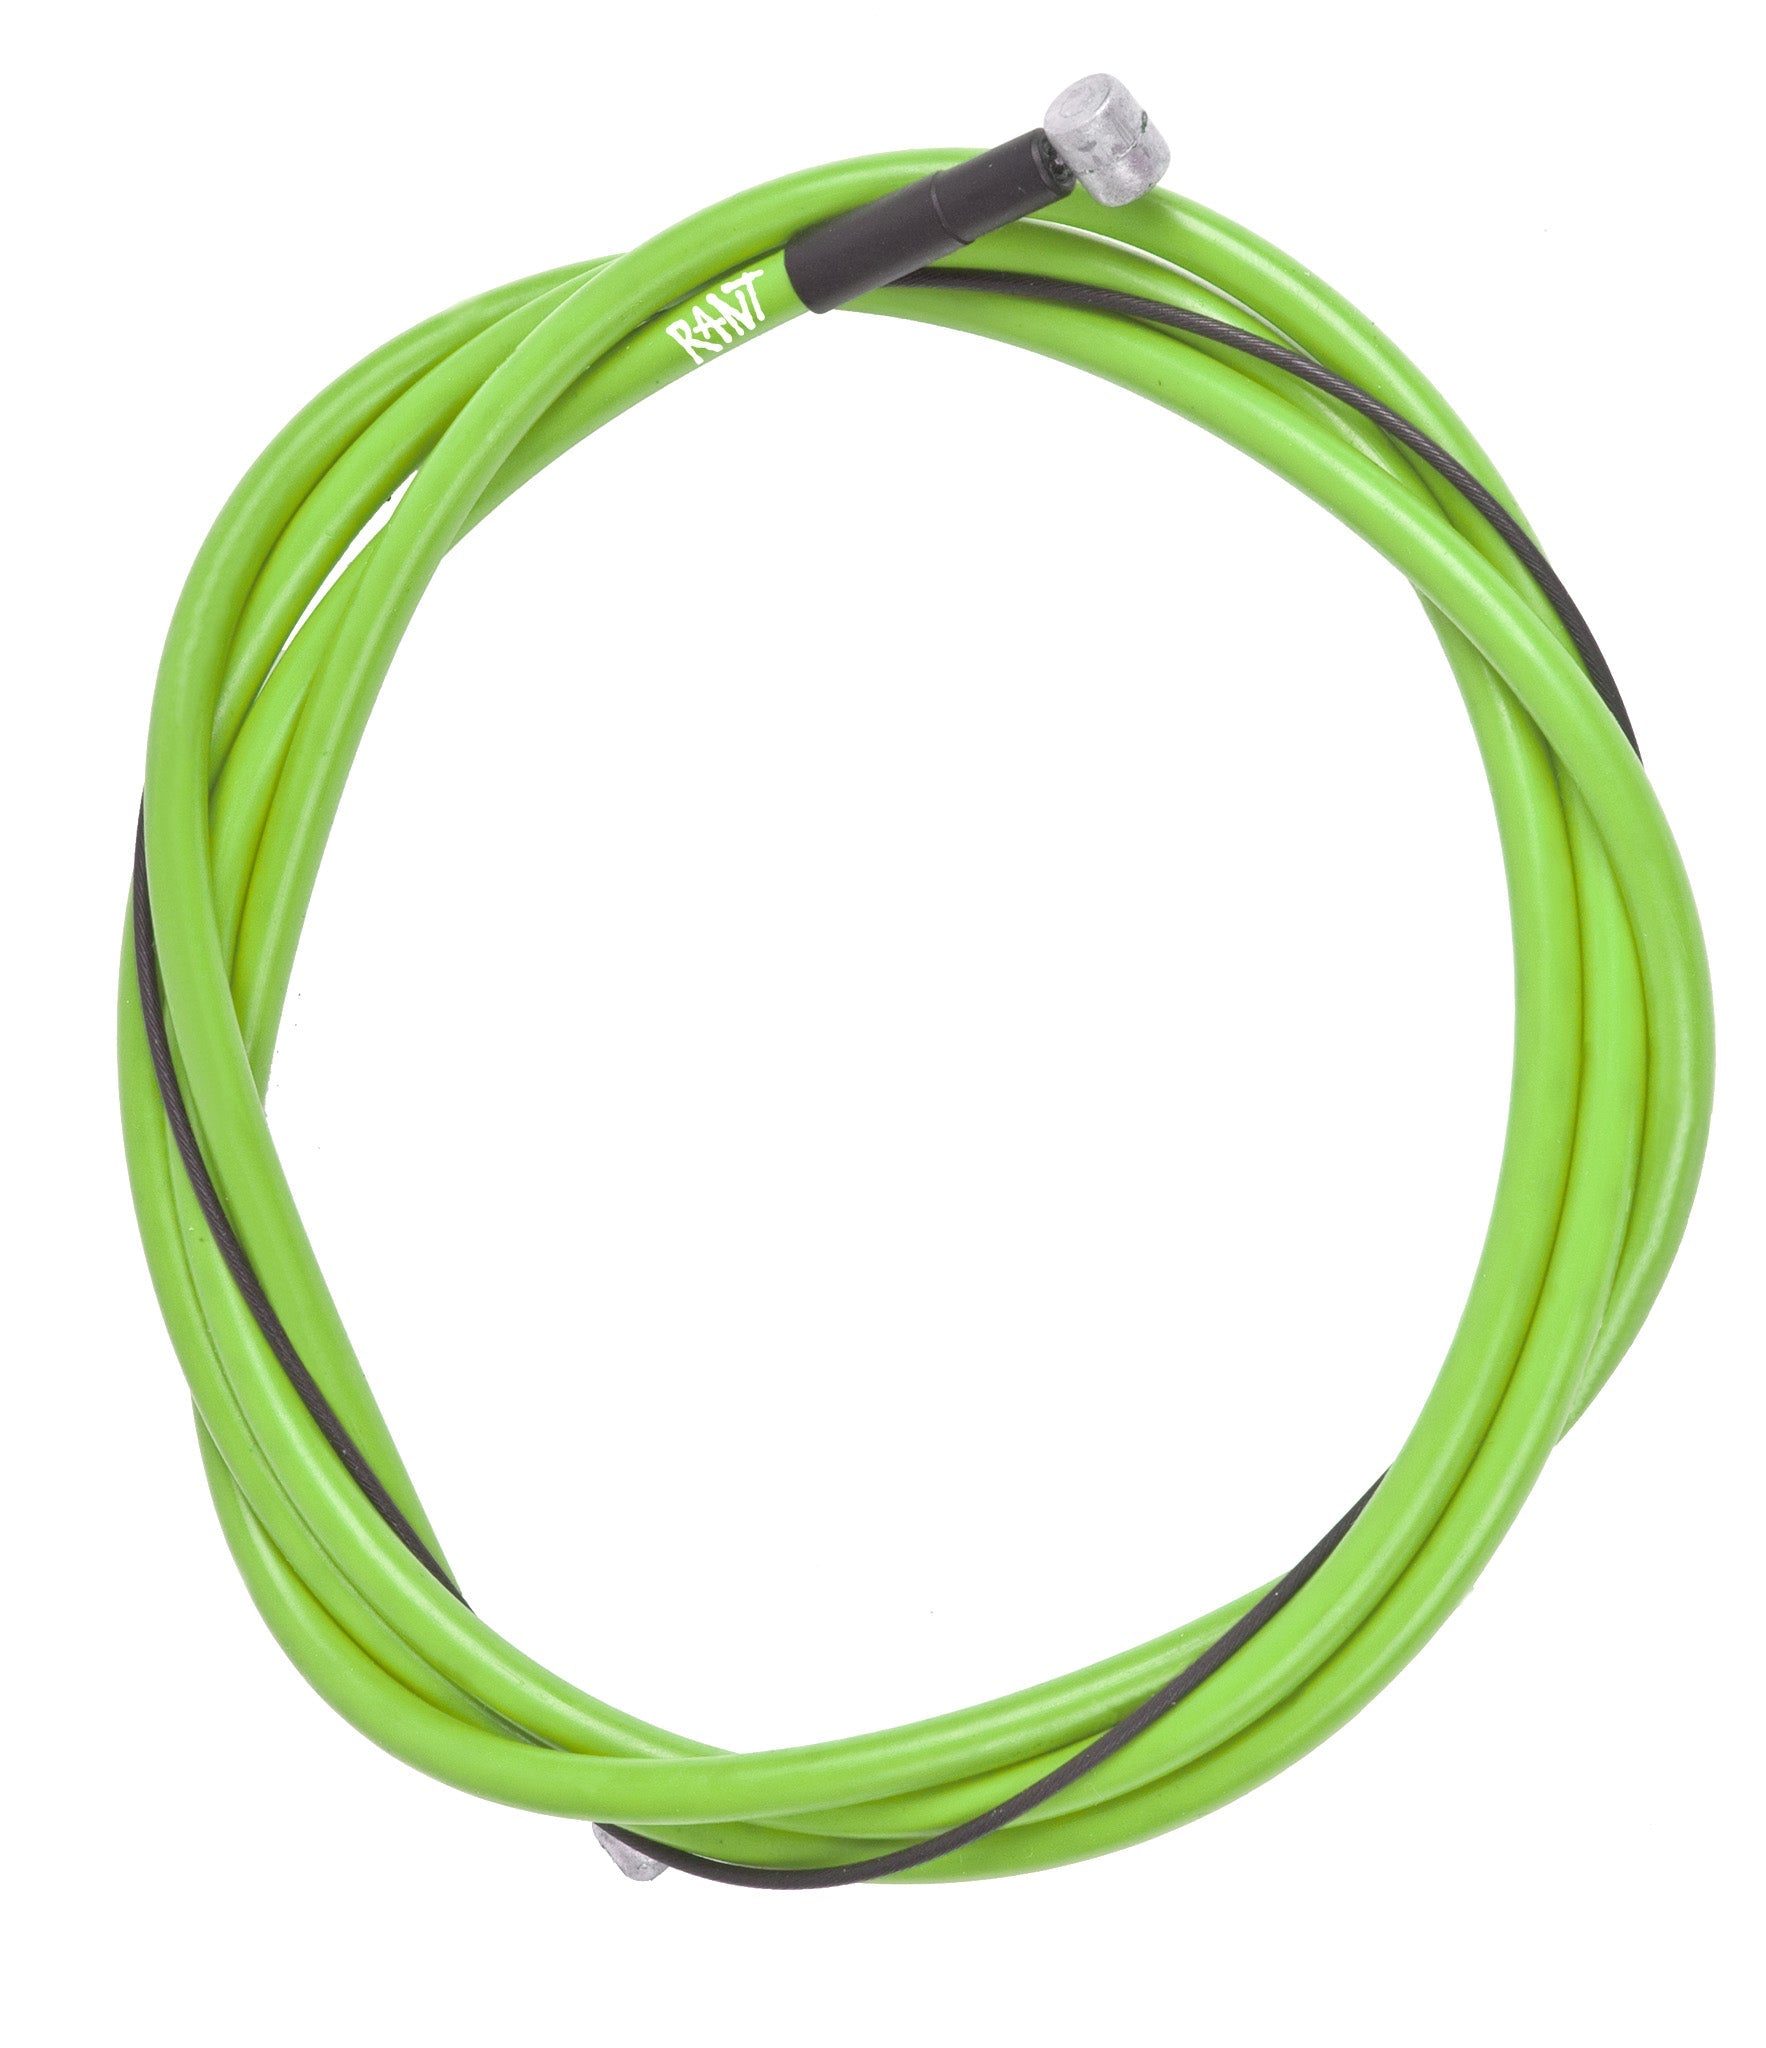 RANT Spring Brake Linear Cable (Lemon Green) - Sparkys Brands Sparkys Brands  Brake Cables, Brakes and Cables, Components, Rant Bmx bmx pro quality freestyle bicycle